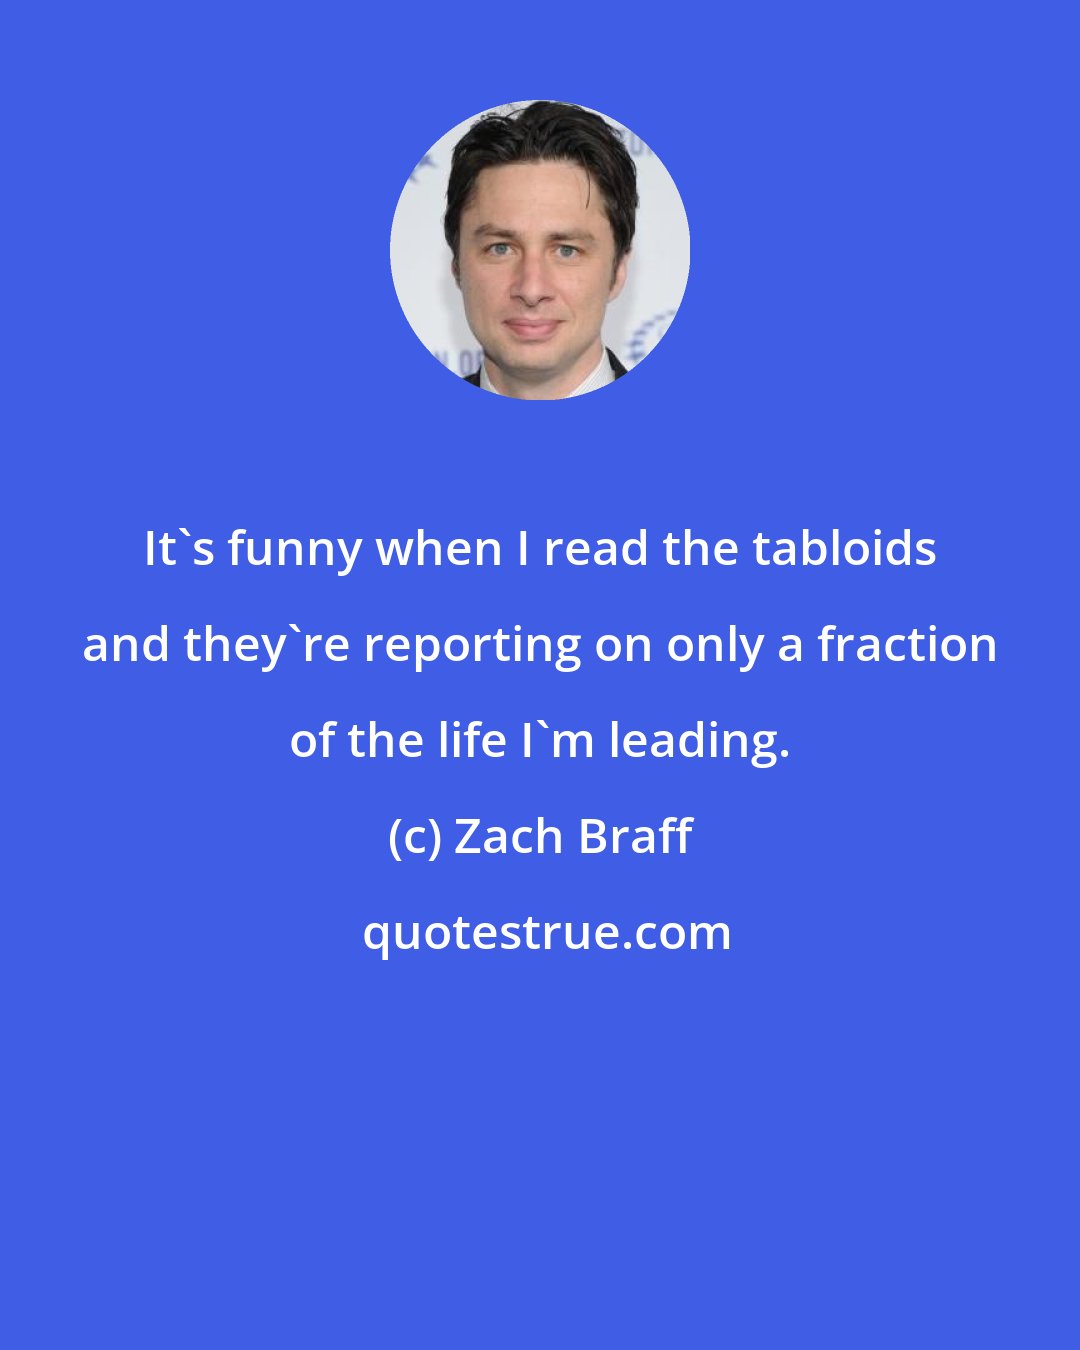 Zach Braff: It's funny when I read the tabloids and they're reporting on only a fraction of the life I'm leading.